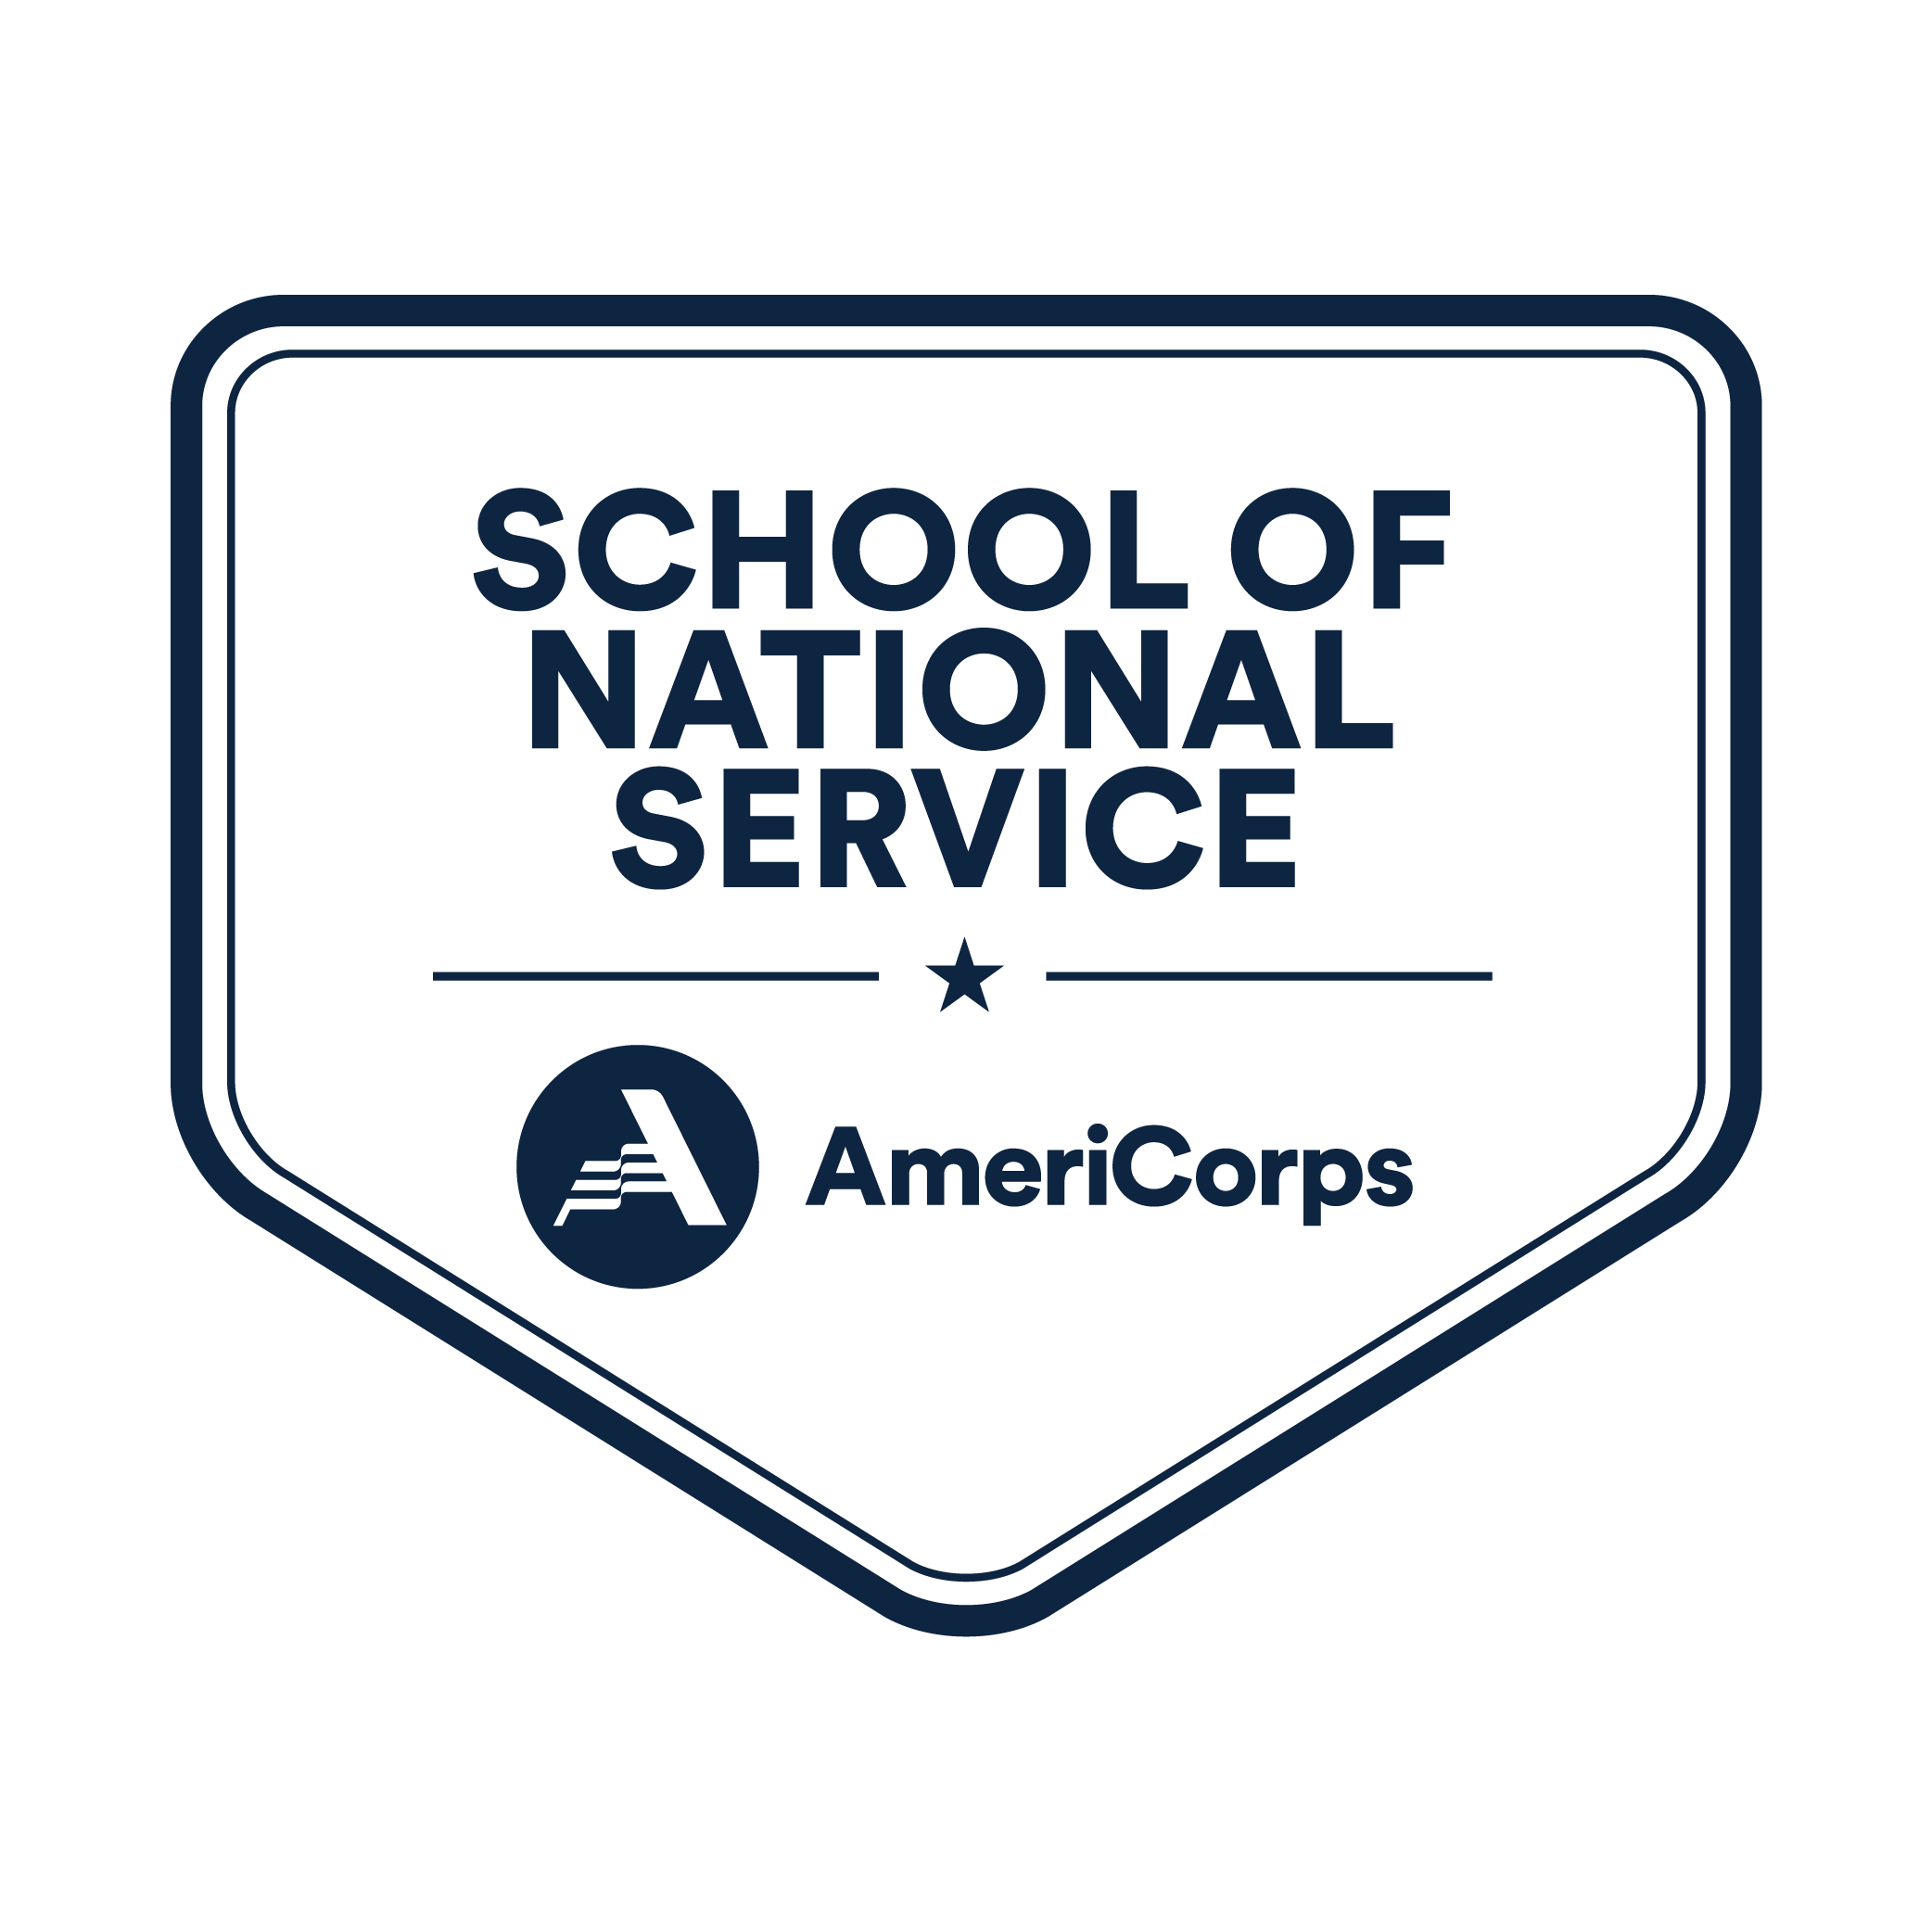 Schools of National Service